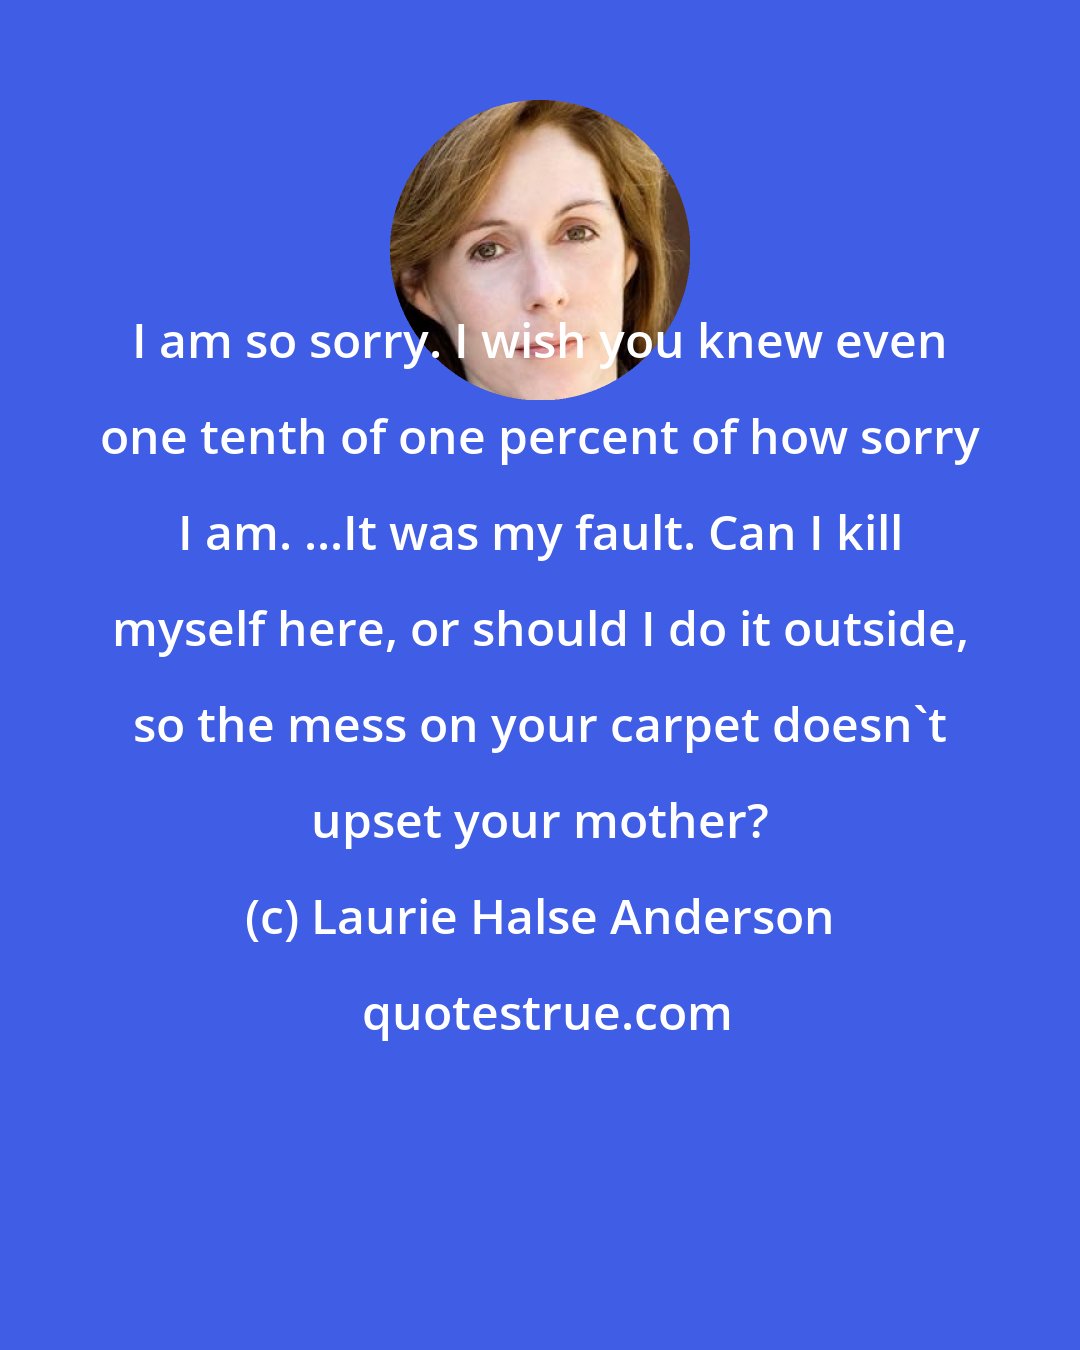 Laurie Halse Anderson: I am so sorry. I wish you knew even one tenth of one percent of how sorry I am. ...It was my fault. Can I kill myself here, or should I do it outside, so the mess on your carpet doesn't upset your mother?